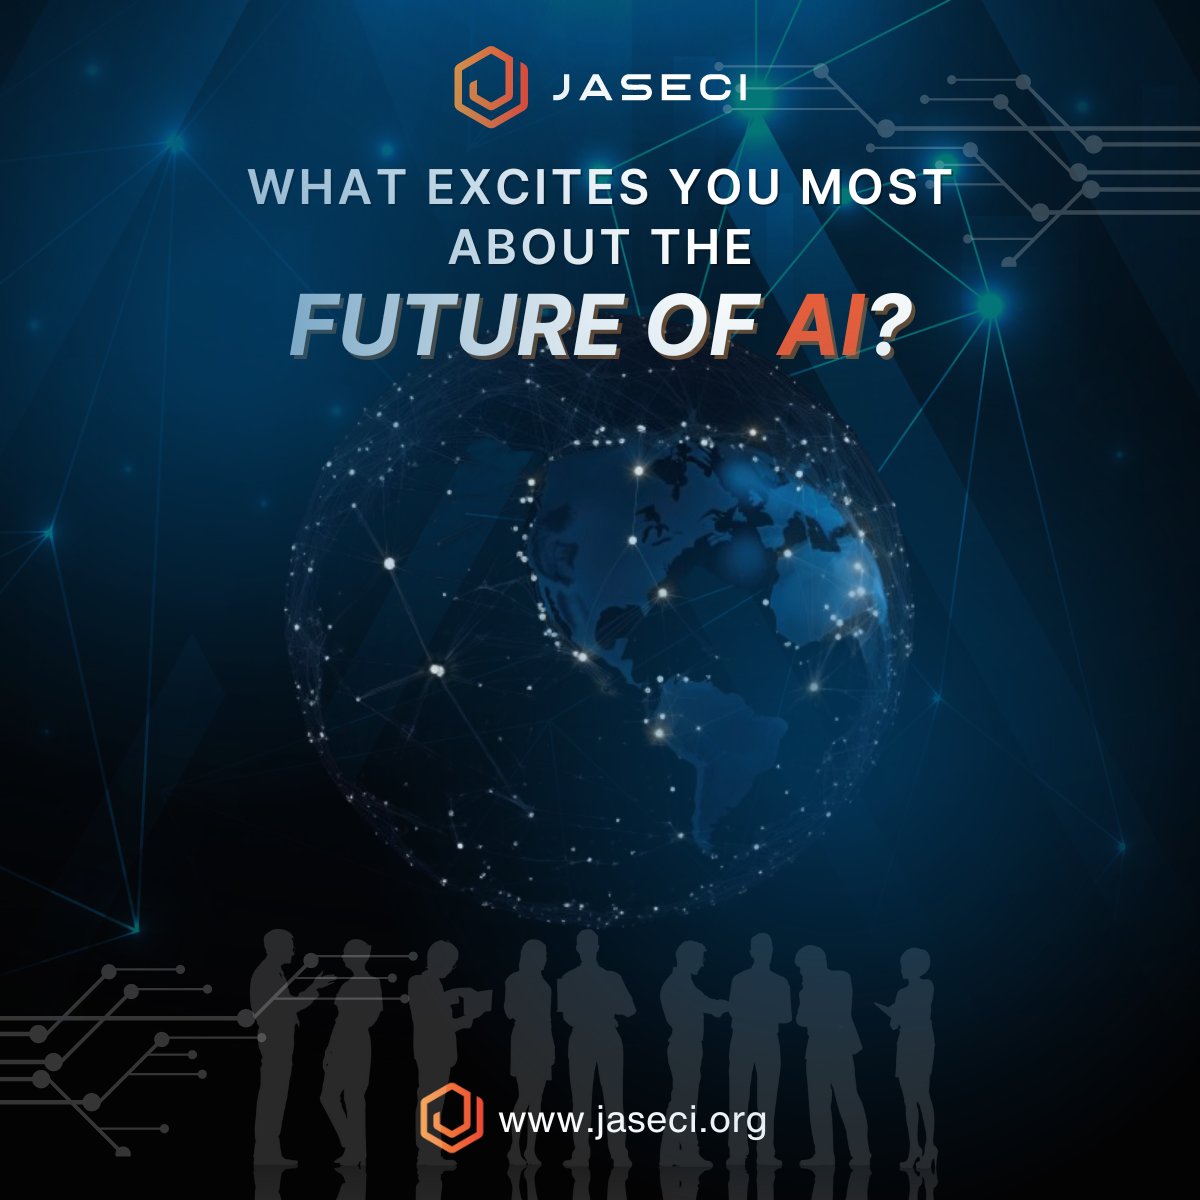 The possibilities with AI are mind-blowing! What aspect of AI's future gets you most hyped? Is it the potential for solving global challenges, the creativity revolution, or something unforeseen?

#Jasecilabs #openai #futureofai #AIRevolution